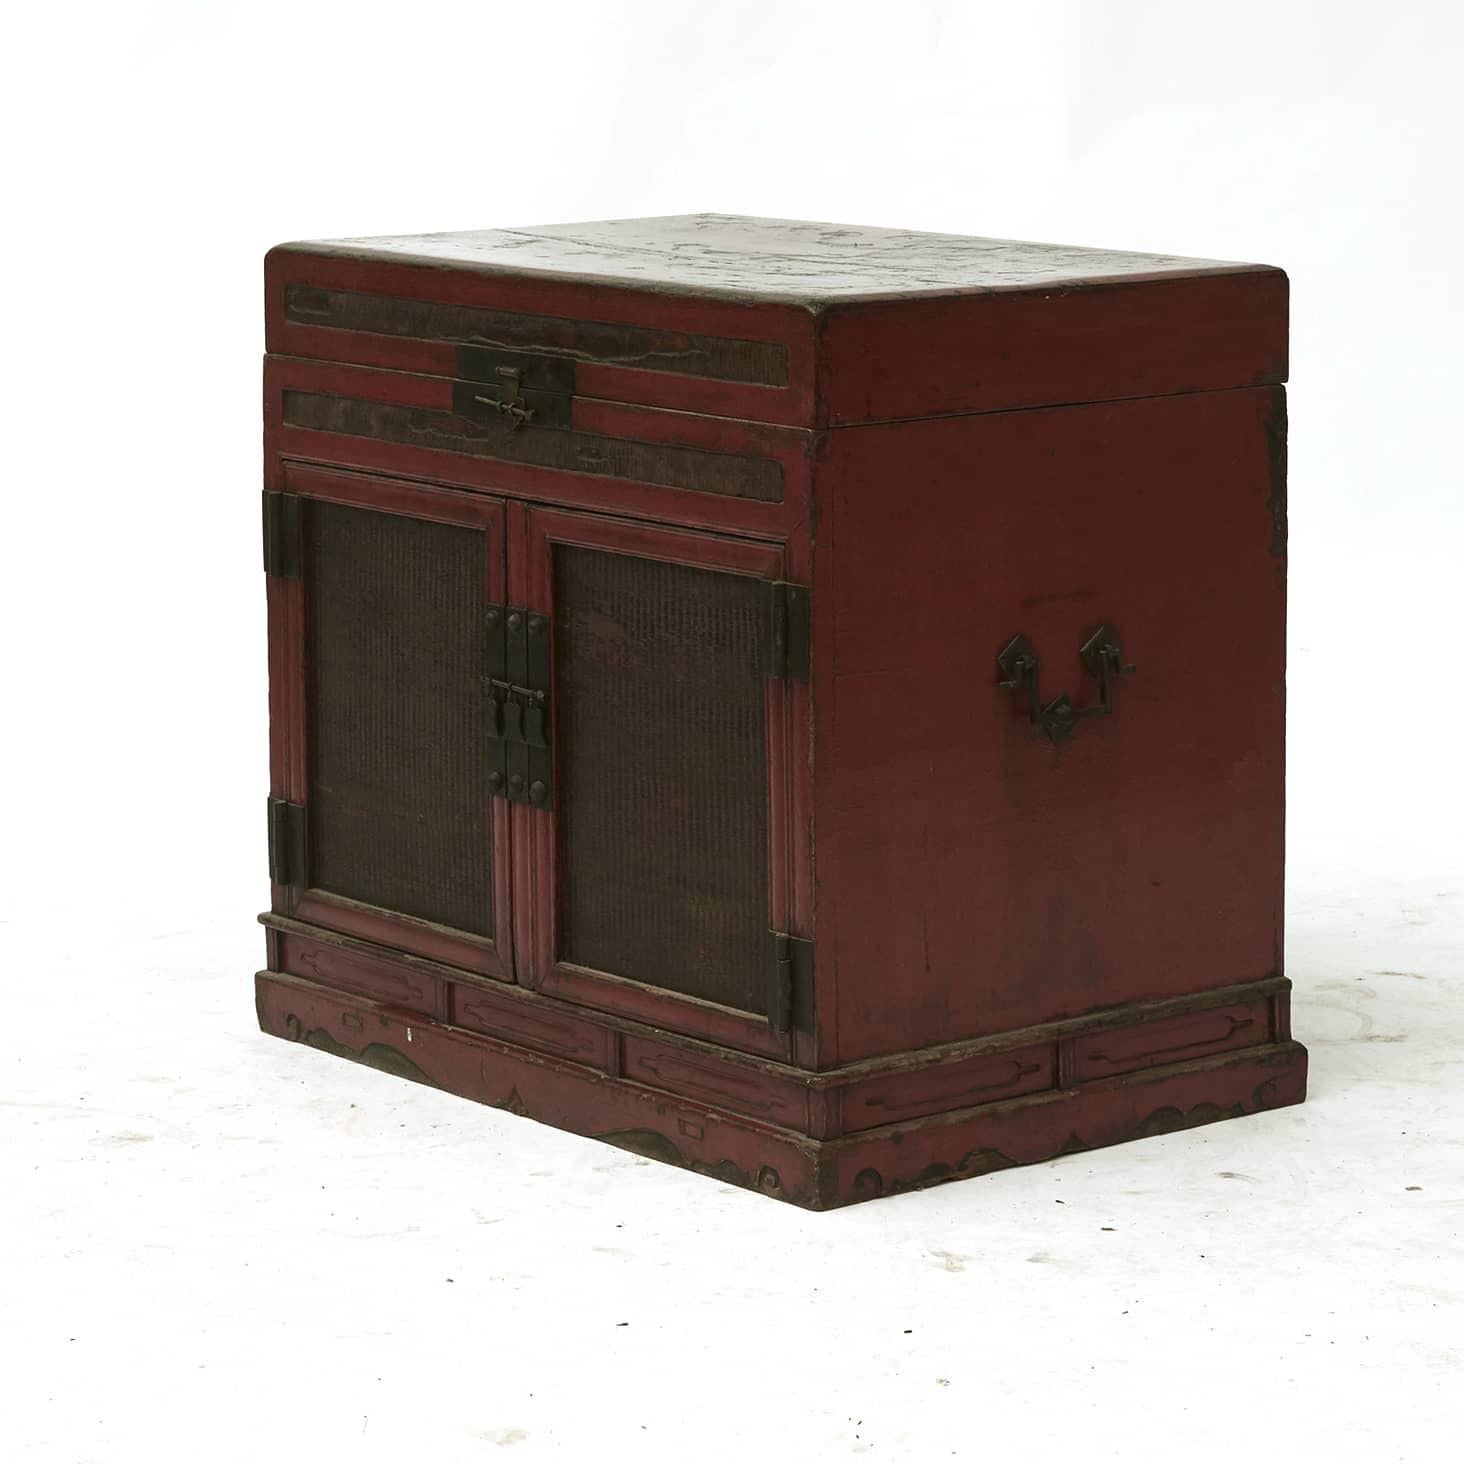 18th Century book chest in red lacquer.
The top lifts up to reveal an open interior storage compartment. Front with a pair of doors with fillings made of natural wicker. In between the doors is a bar, that can be removed making it possible to store